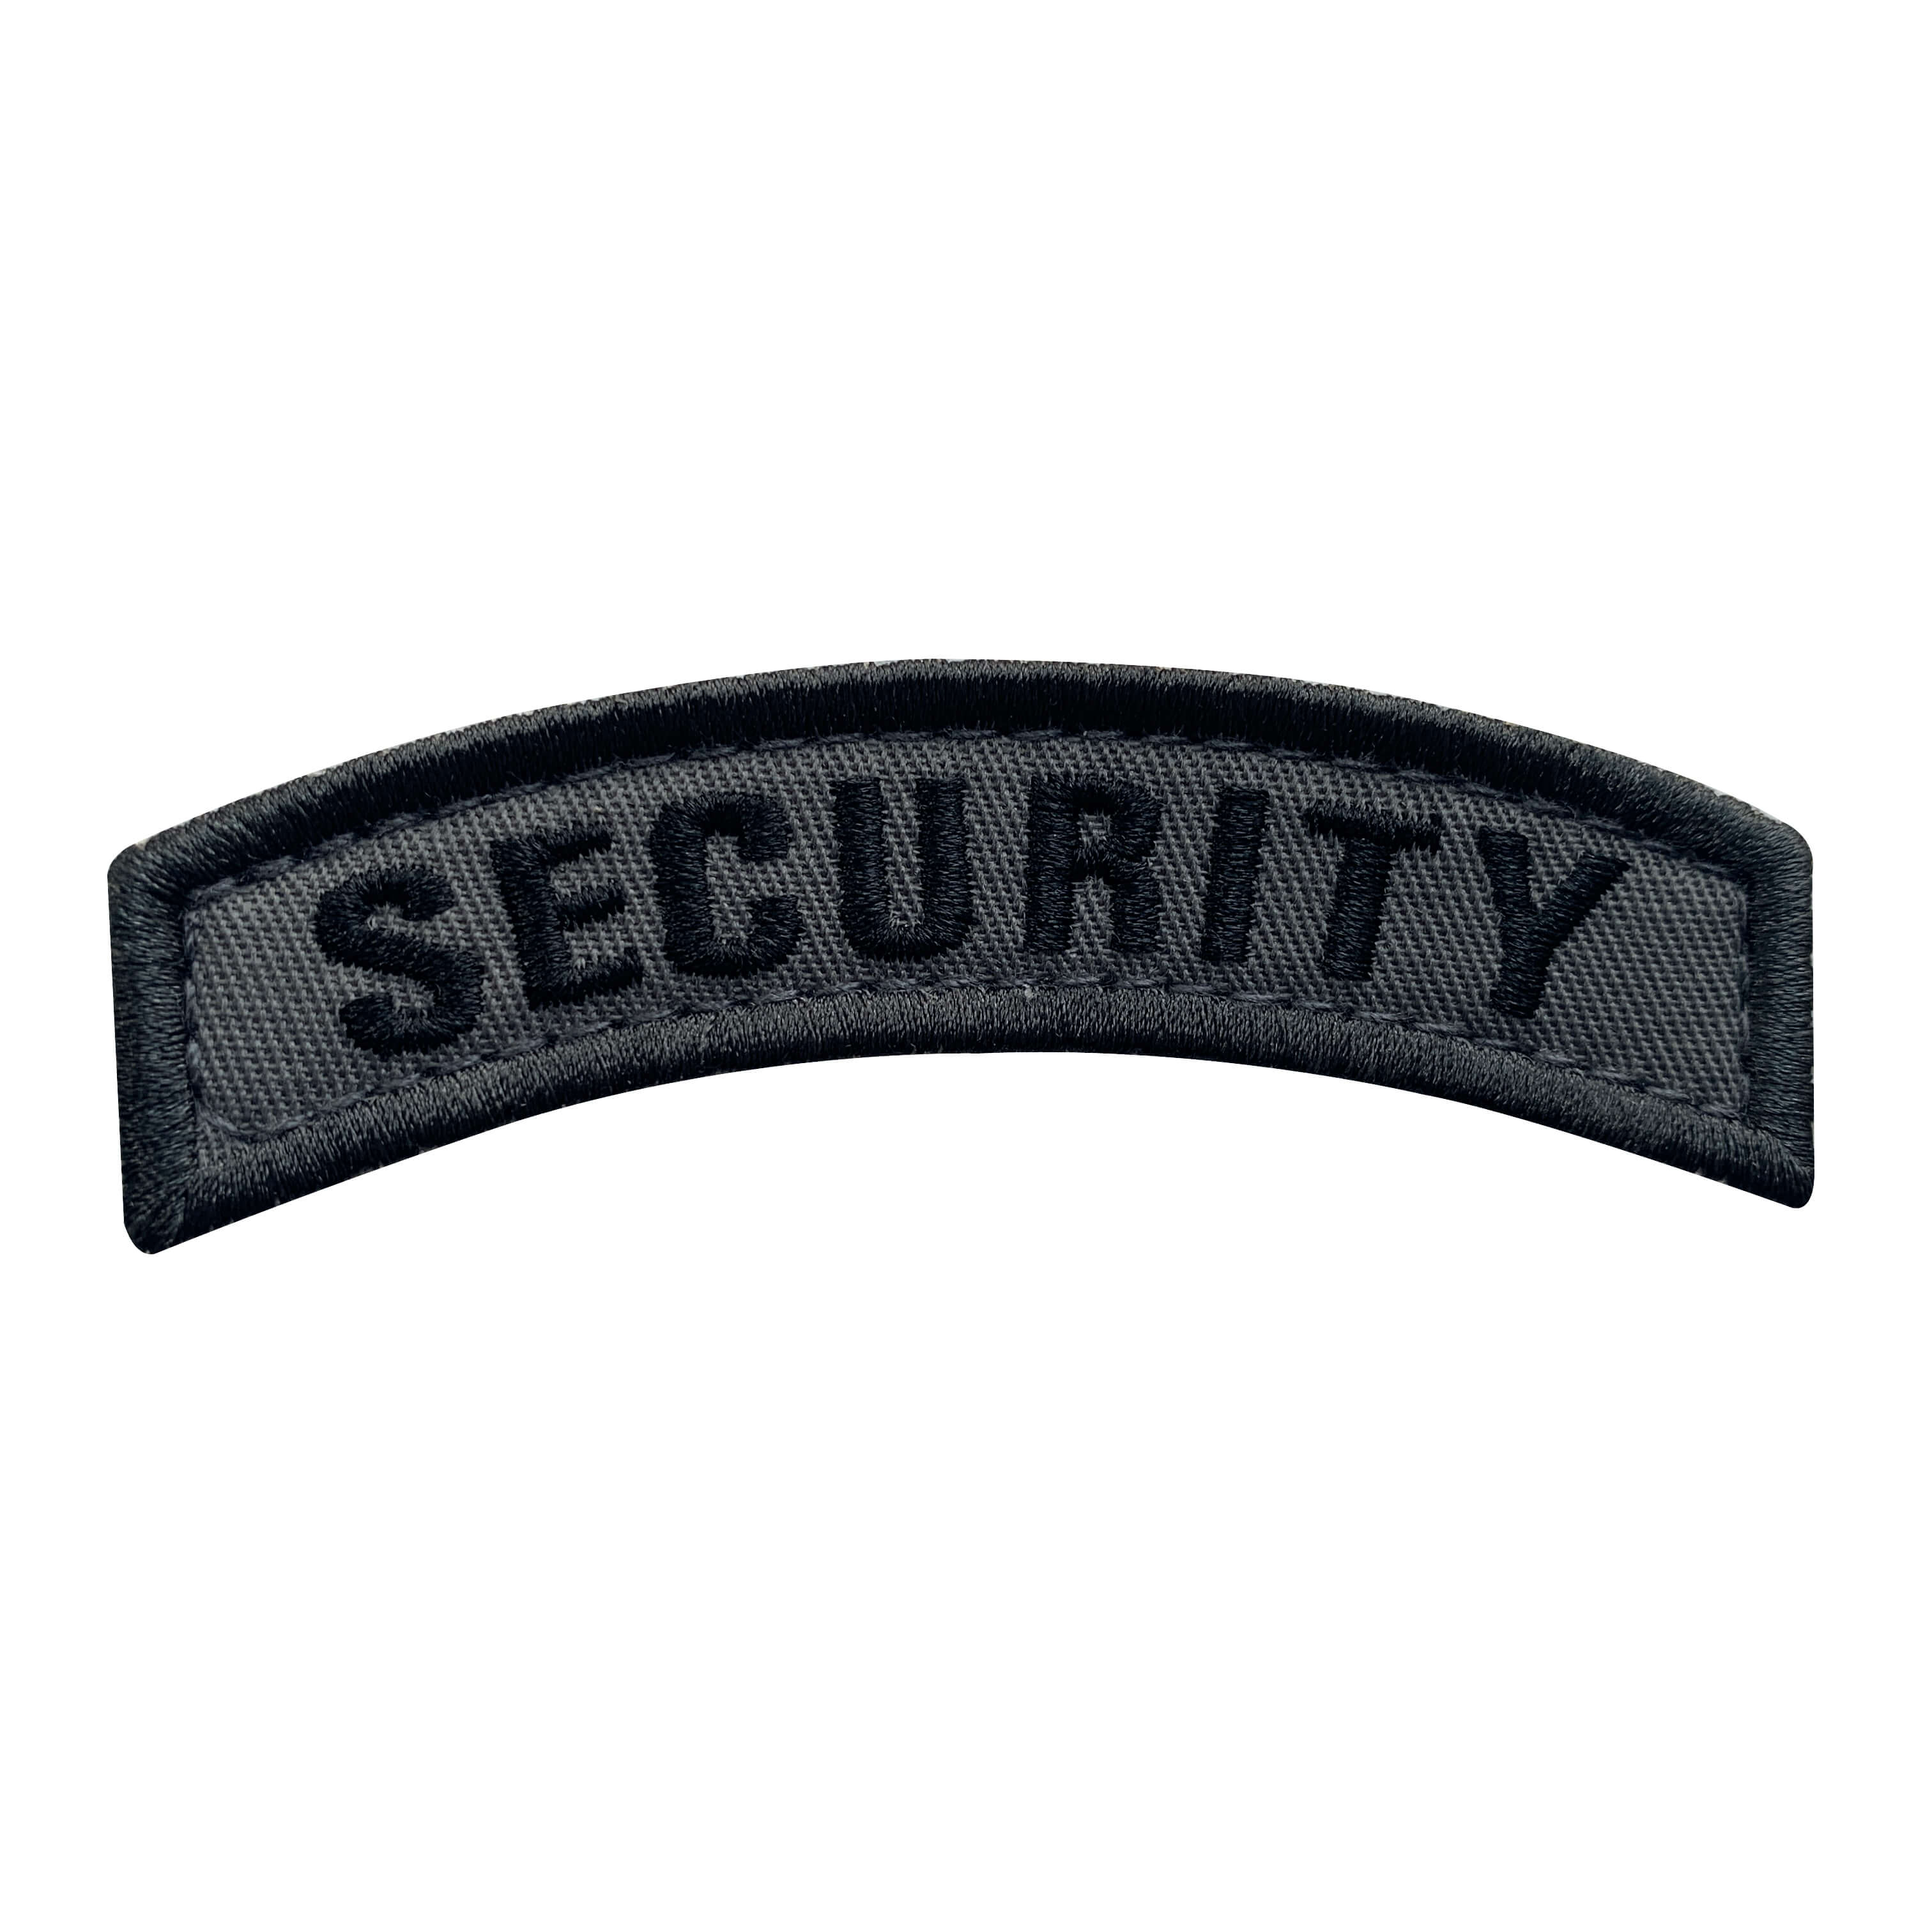 uuKen 3x2 inches Small Embroidery Fabric Security Patch for Caps Hats Law  Enforcement Uniforms Vest and Tactical Clothing Jackets